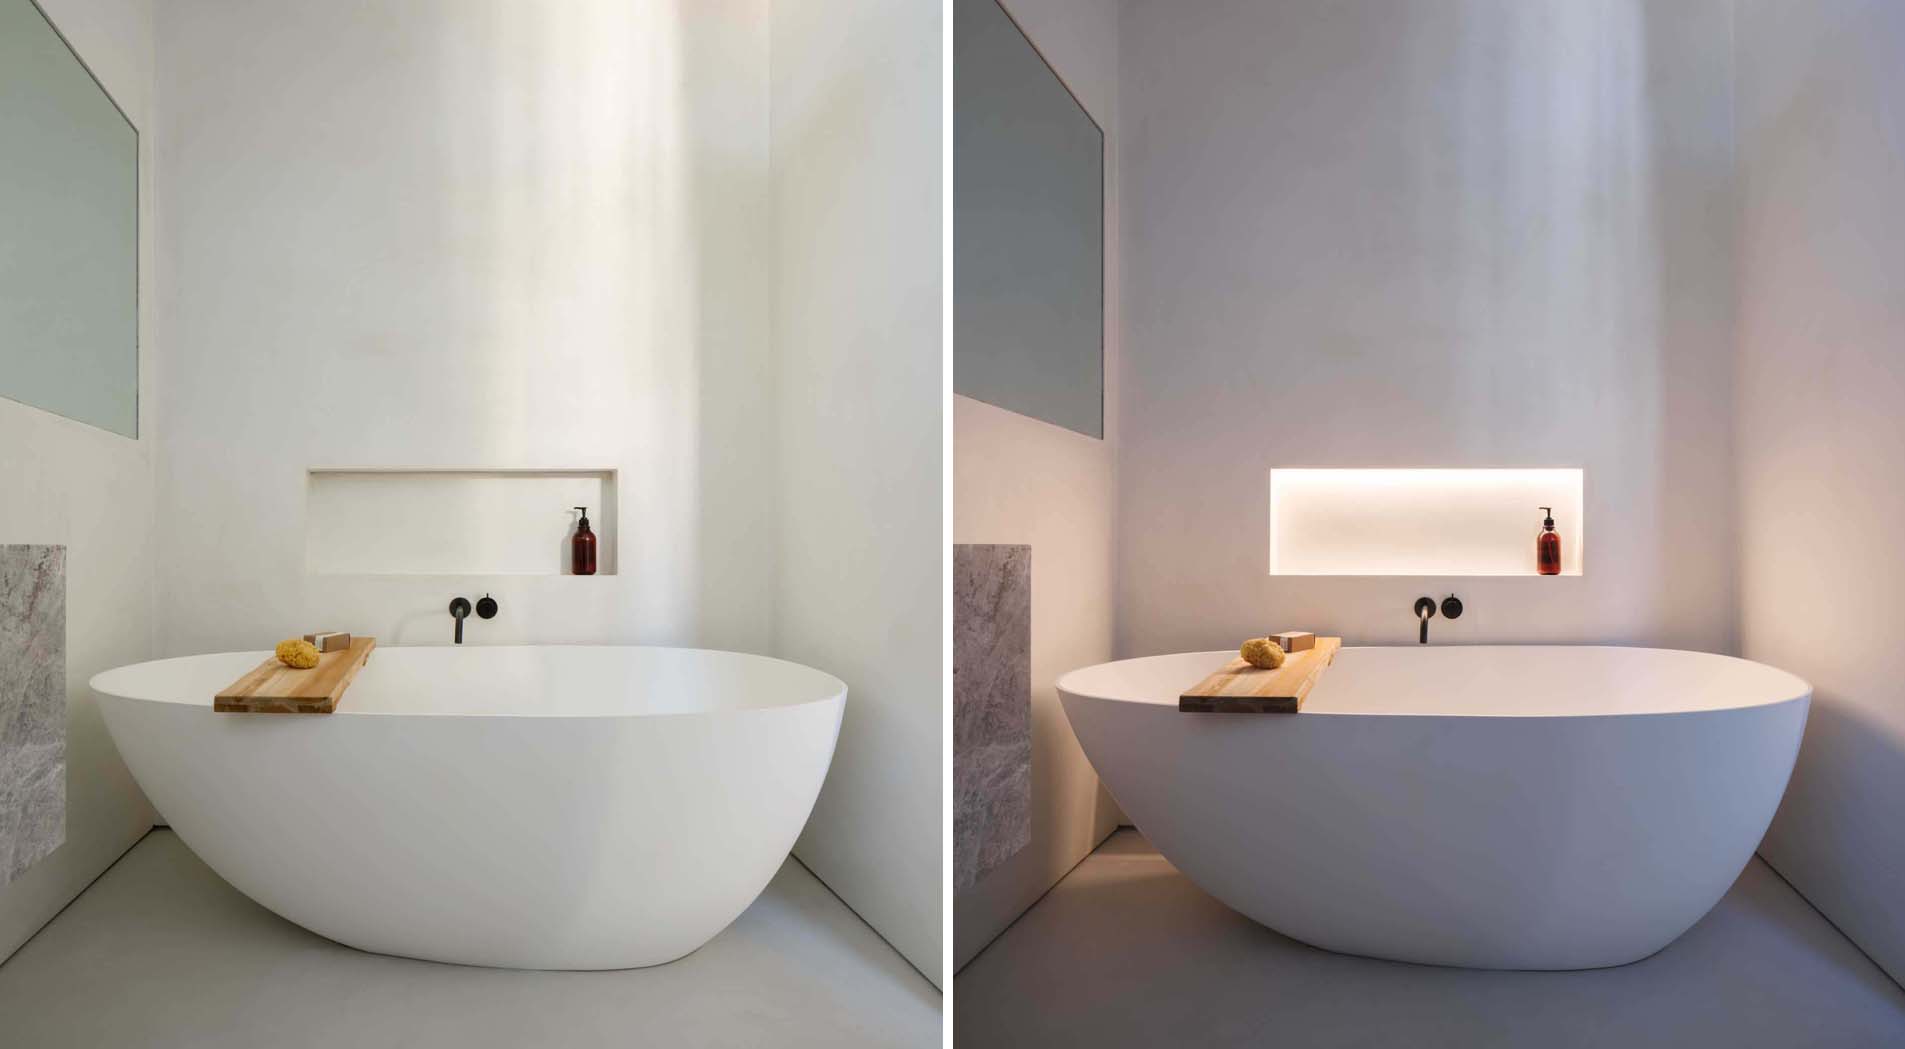 A shelving niche with hidden LED lighting has been built into the wall adjacent to the freestanding bathtub in this modern bathroom, allowing for items like soap to be kept within reach.